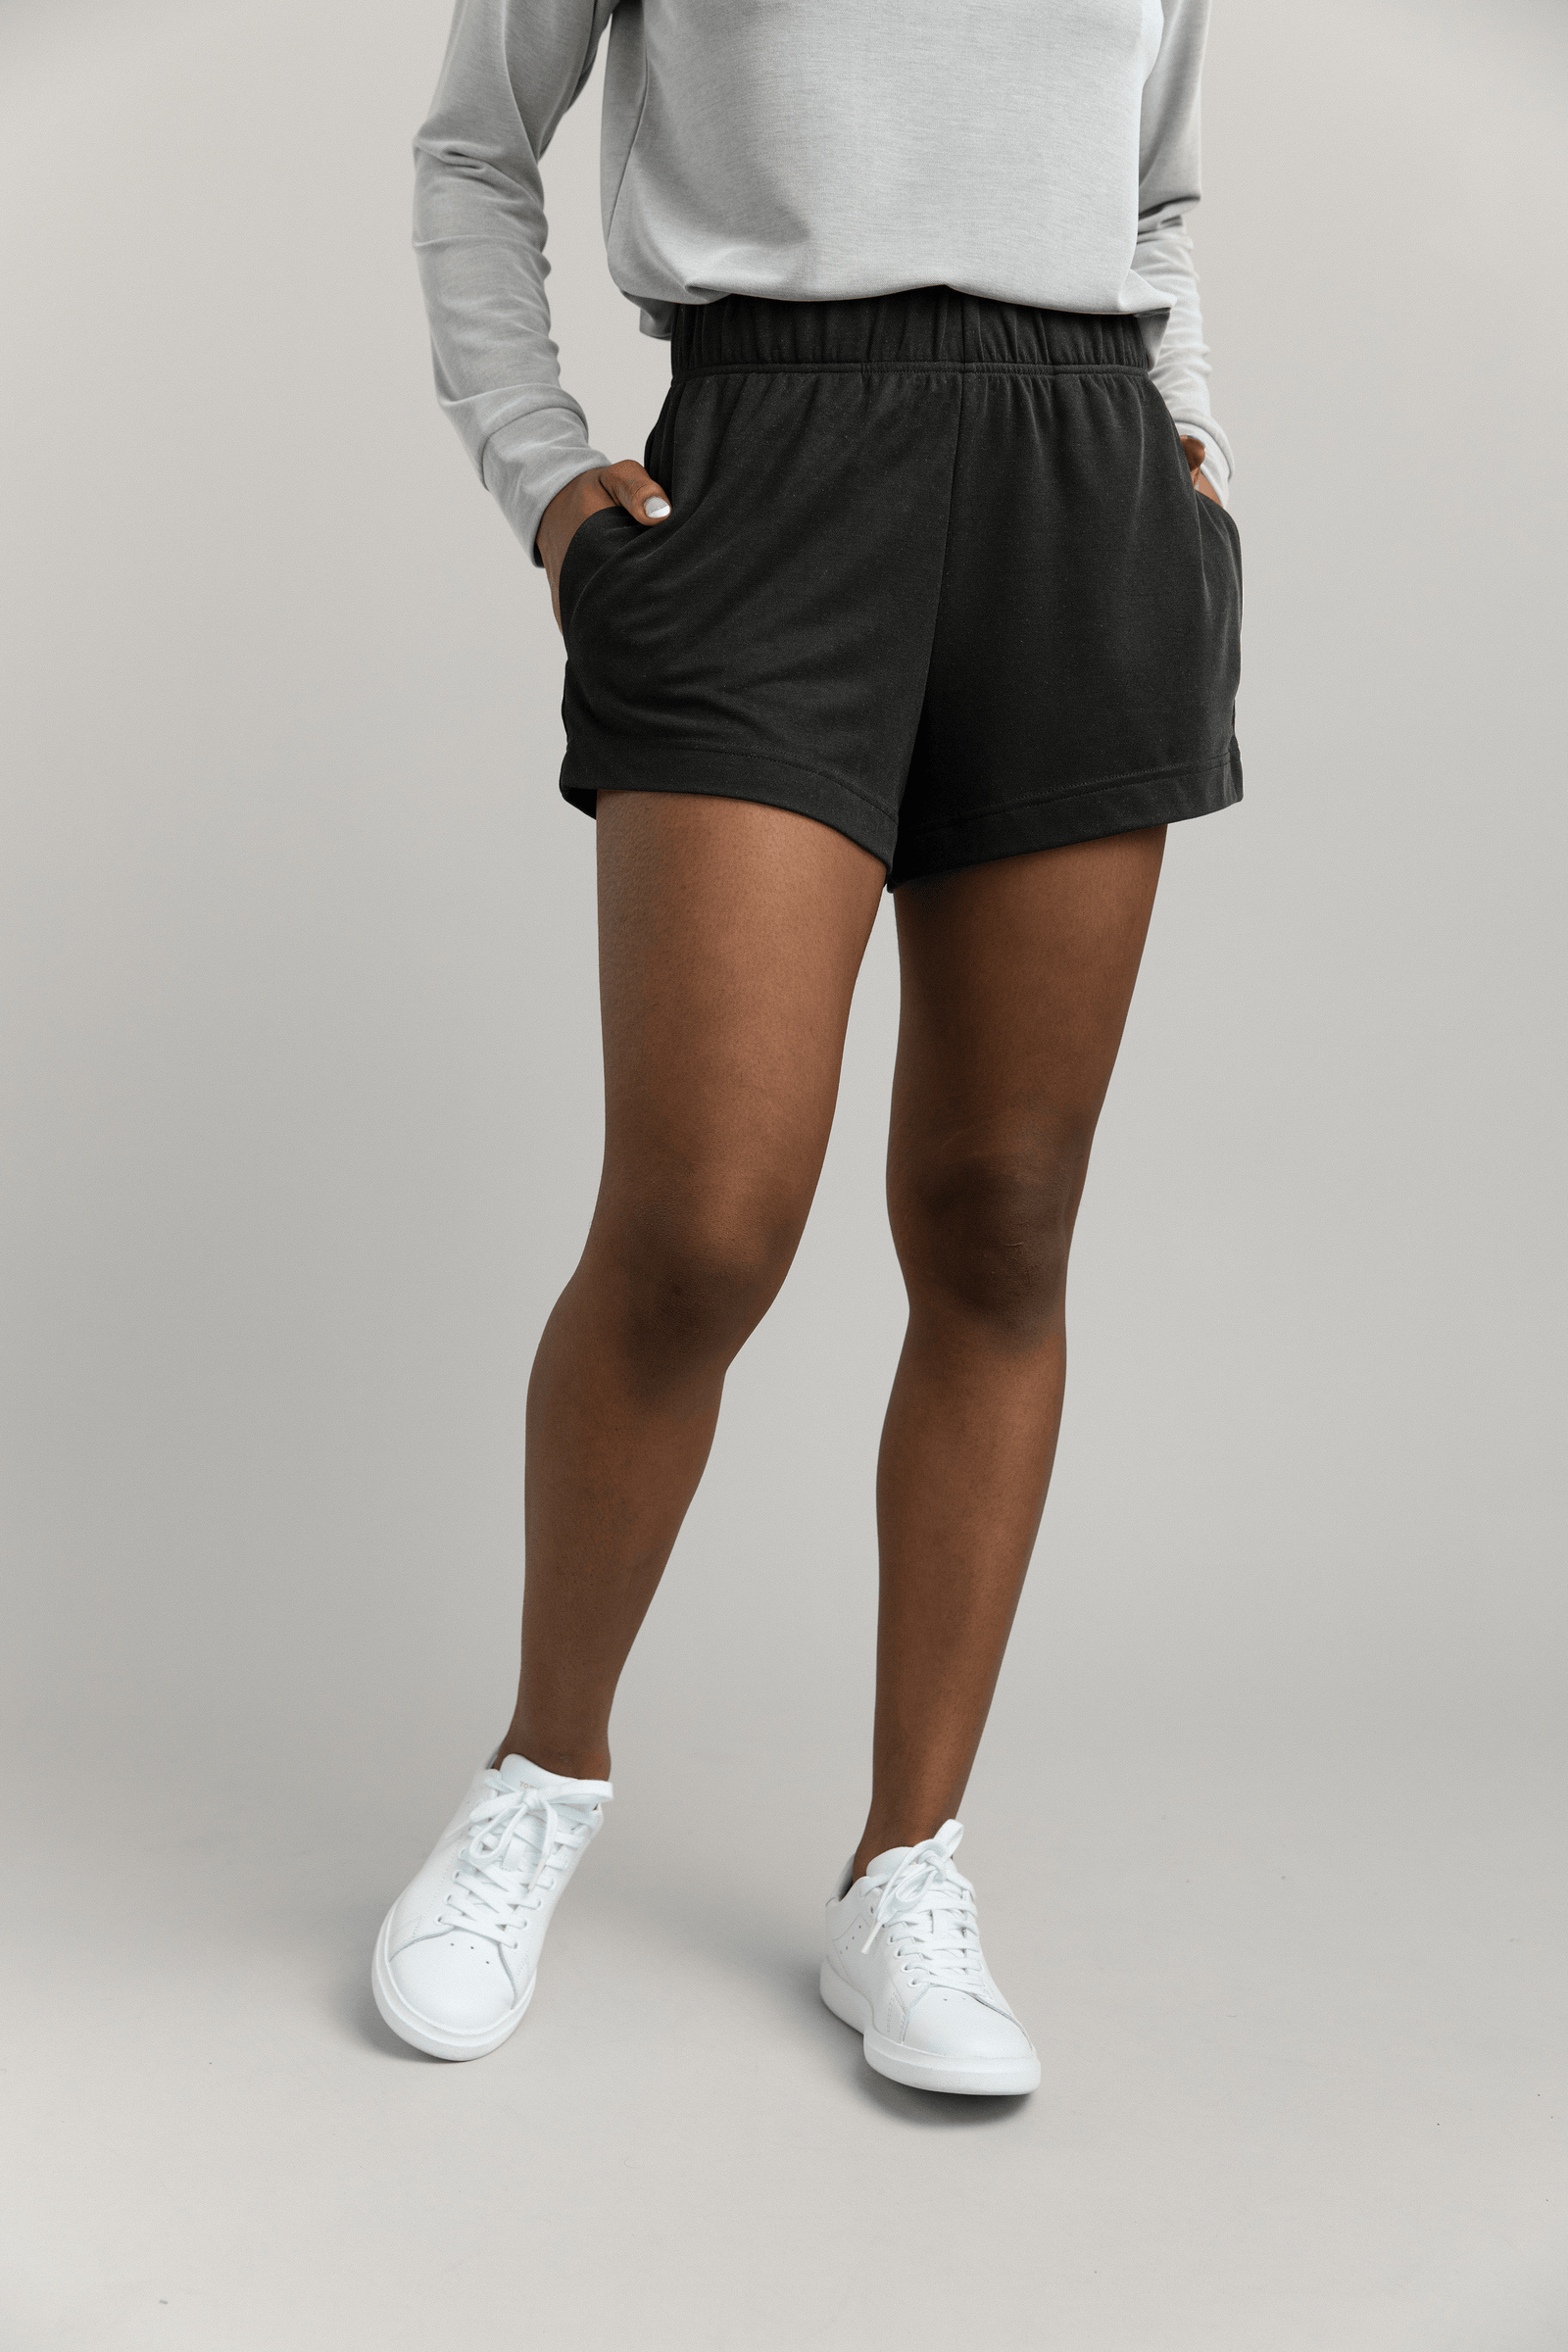 Light Grey Women's Shorts, White Gray Solid Color Modern Minimalist Short  Tights-Made in USA/EU